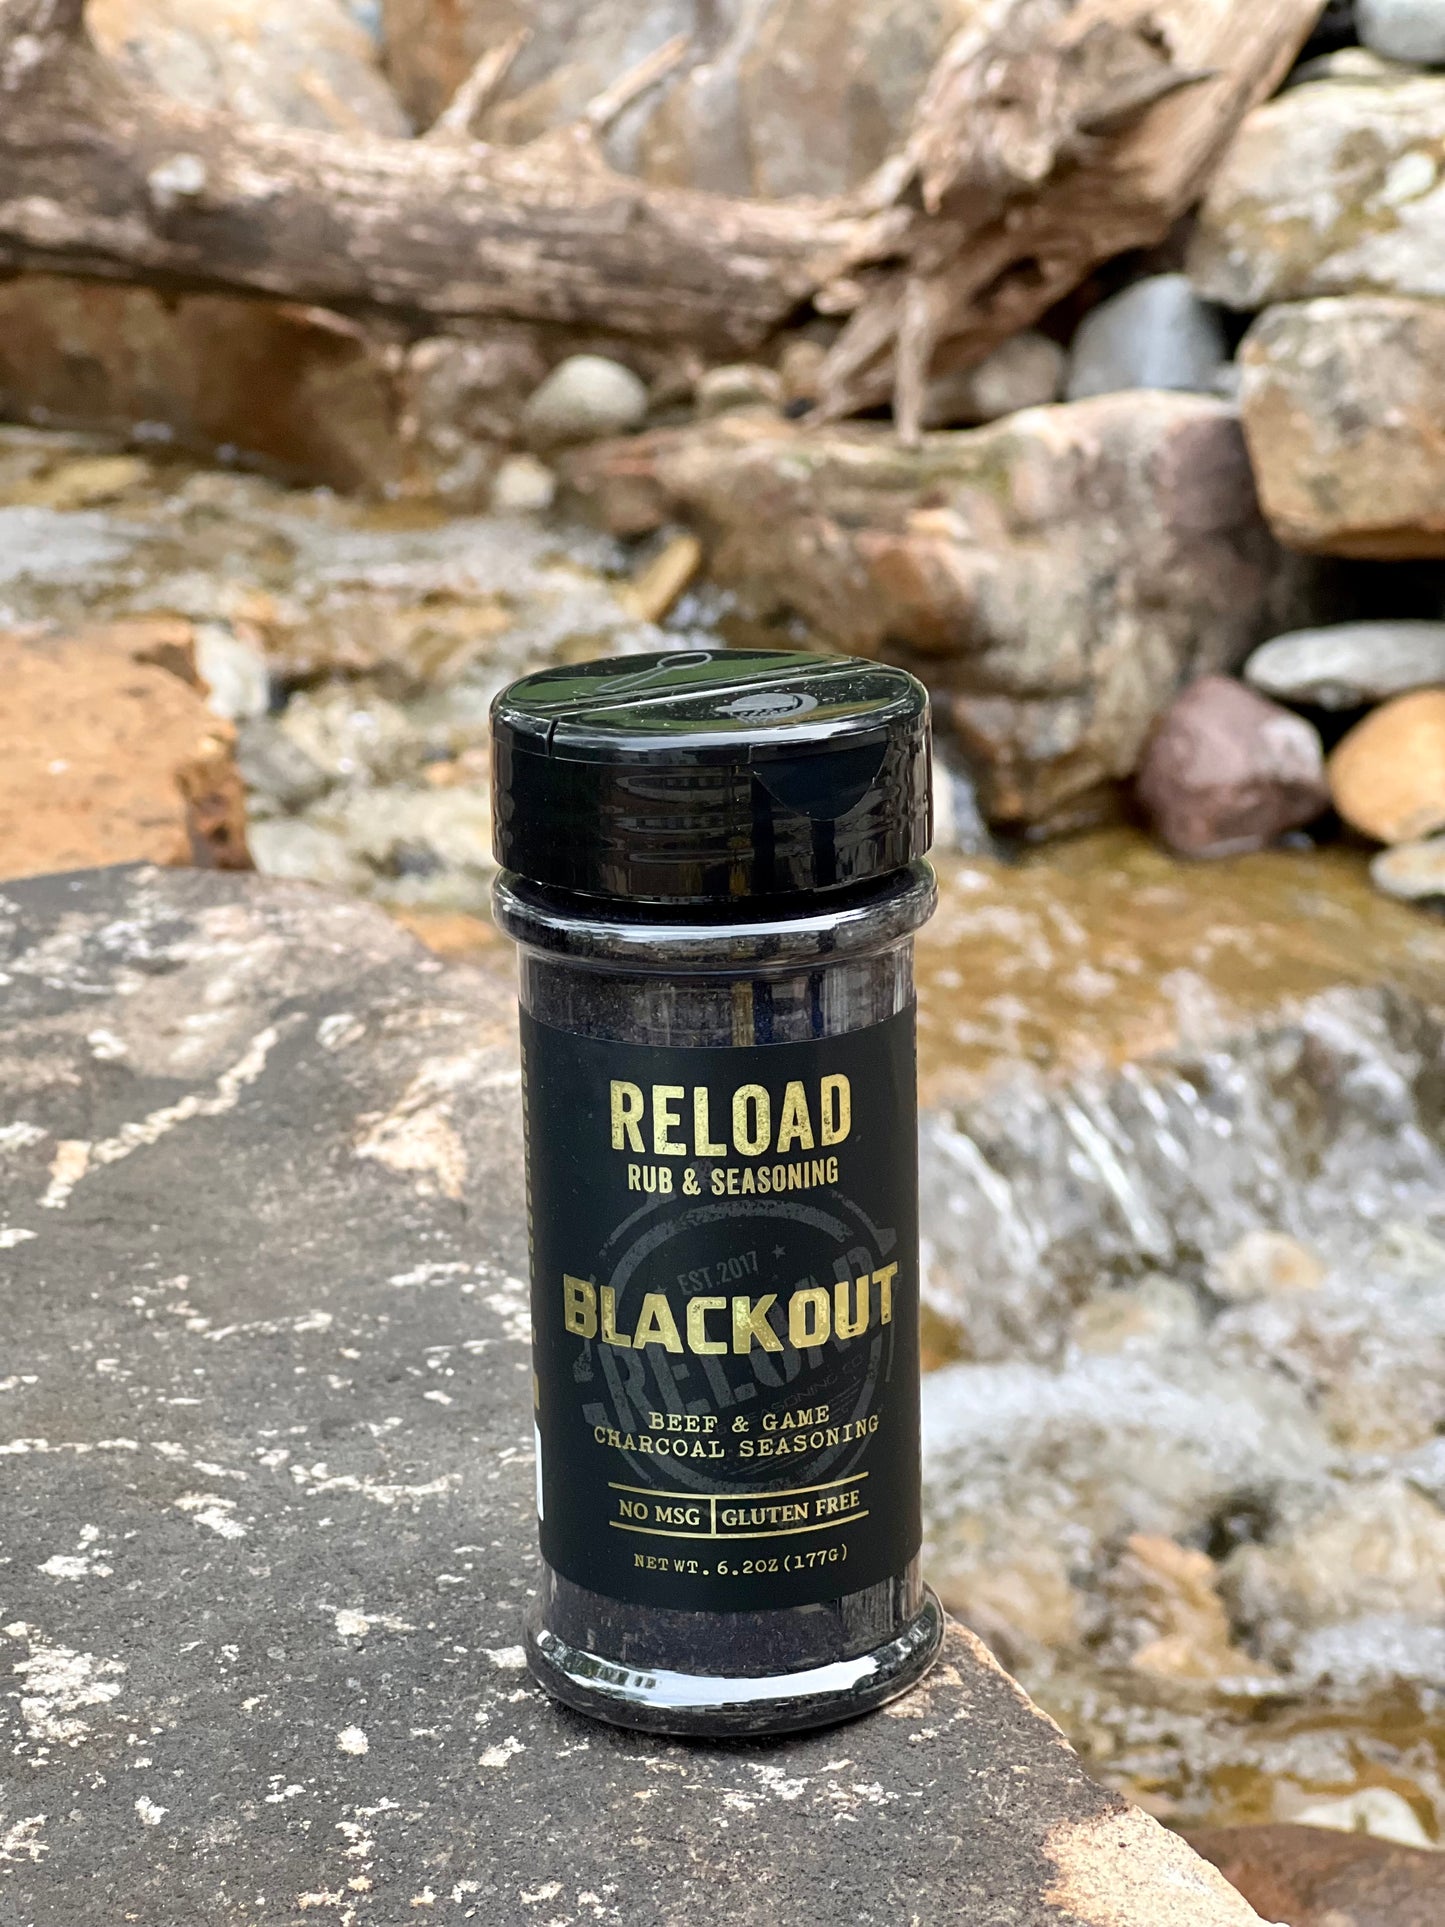 Reloaded BLACKOUT Steak and Game